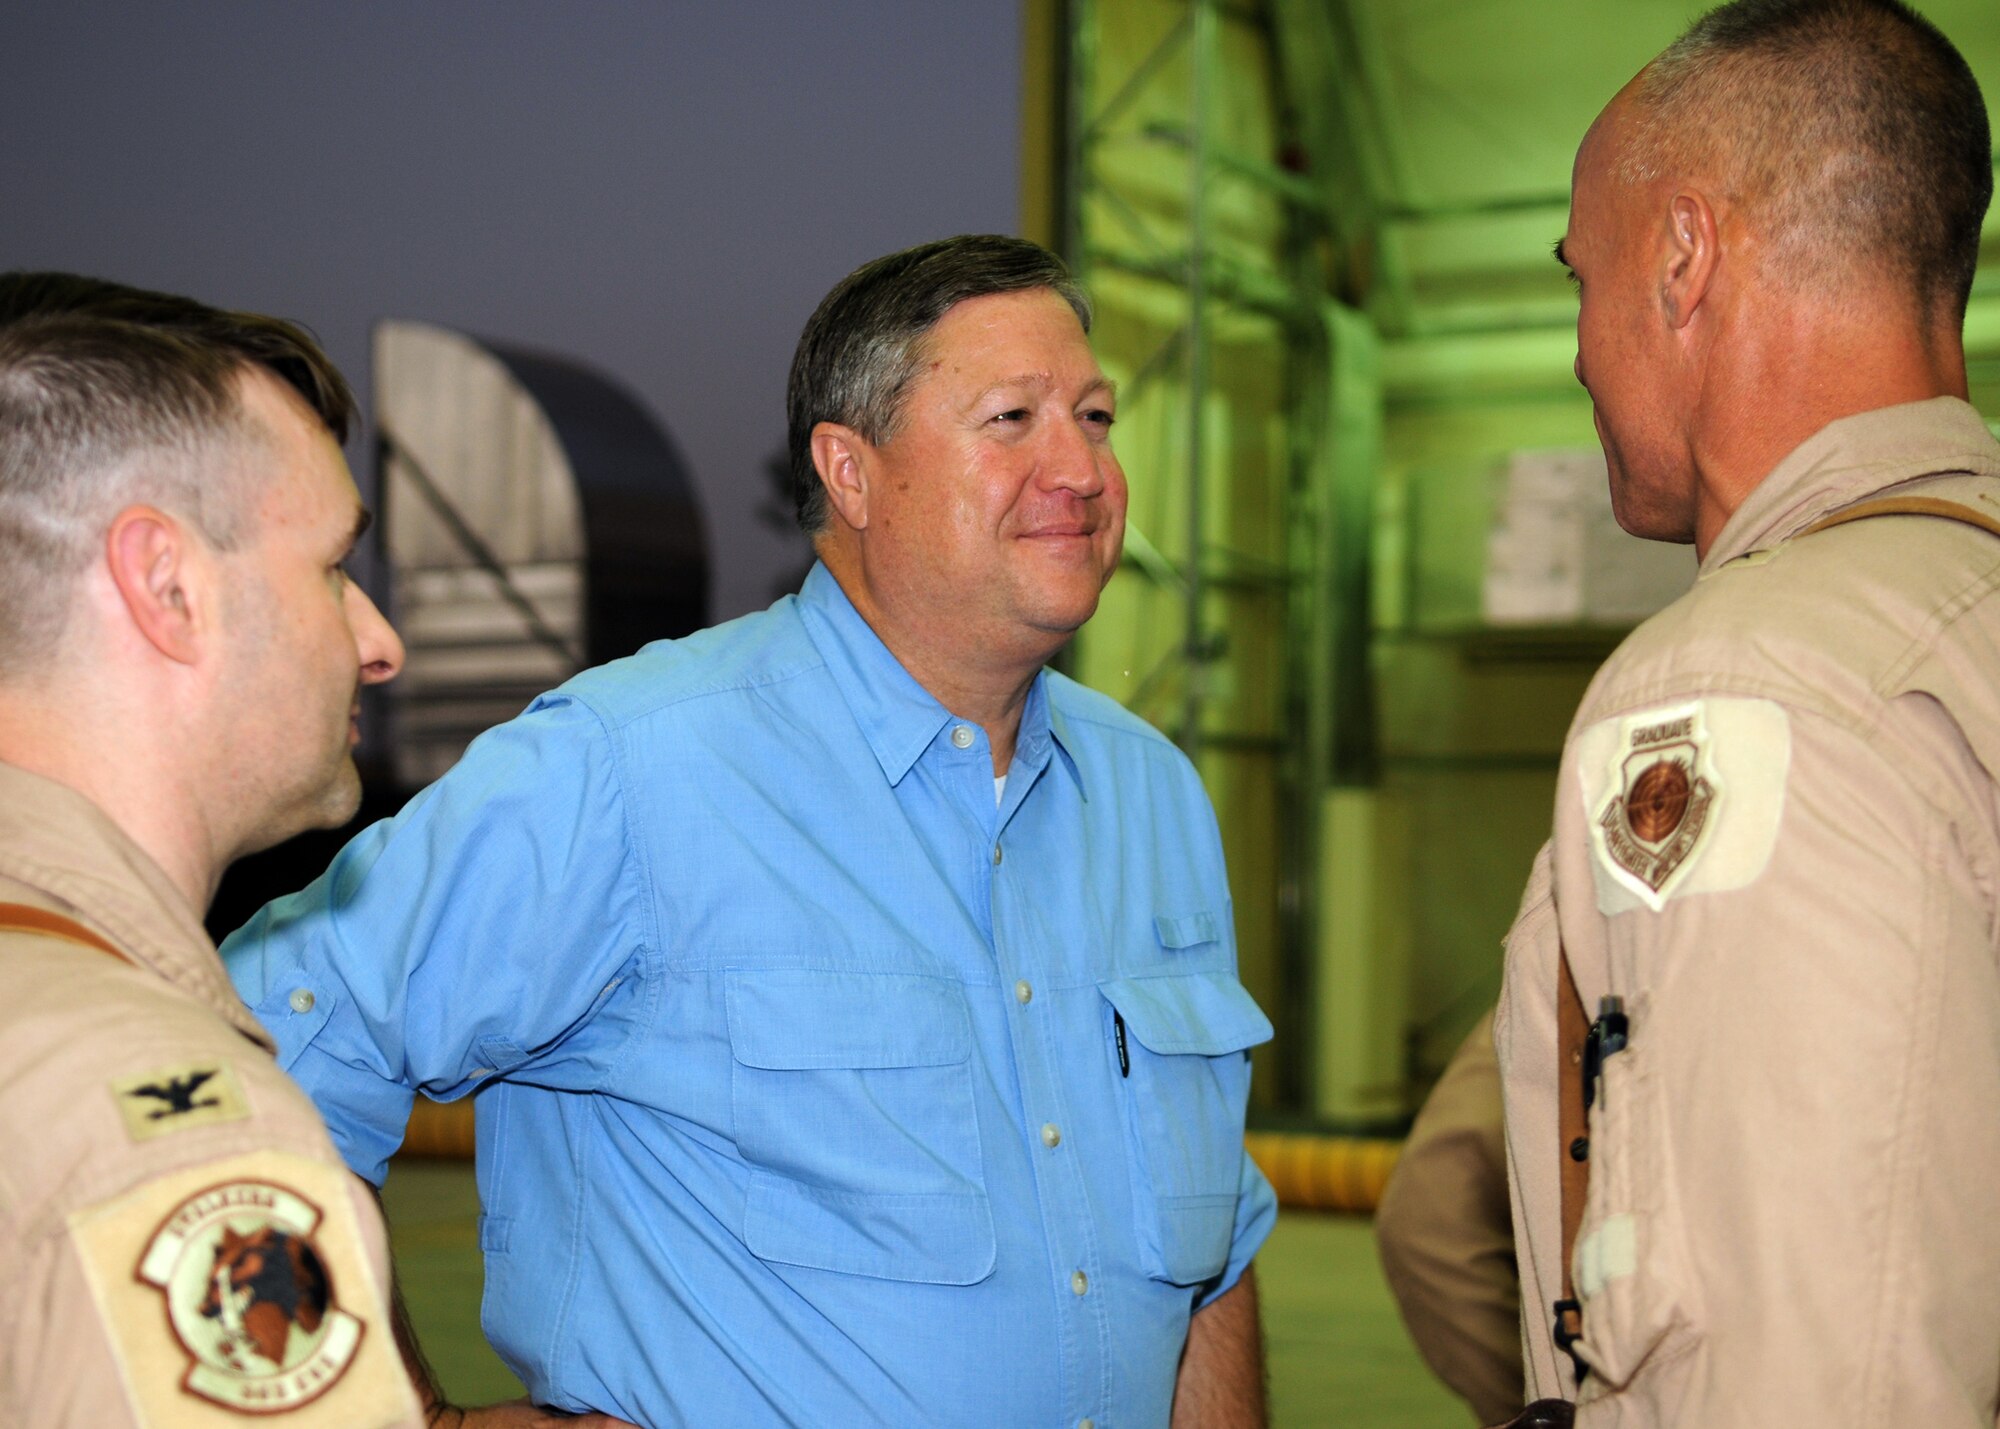 Secretary of the Air Force Michael Donley discusses on-going operations with Col. Luke Grossman (left), 332nd Air Expeditionary Wing vice commander, and Brig. Gen. Craig Franklin, 332nd AEW commander, Aug. 27 during a tour of the MC-12 Liberty aircraft hangar at Joint Base Balad, Iraq.  The 332nd AEW employs the spectrum of airpower capability throughout the Iraqi theater of operations in support of ground forces and Iraqi capacity-building, including strike; airlift and airdrop; combat search and rescue; aeromedical evacuation; and intelligence, surveillance and reconnaissance.  Secretary Donley visited the base to meet with the Airmen there and to get a first-hand look at the 332nd AEW's diverse mission.   (U.S. Air Force photo/Staff Sgt. Heather M. Norris)